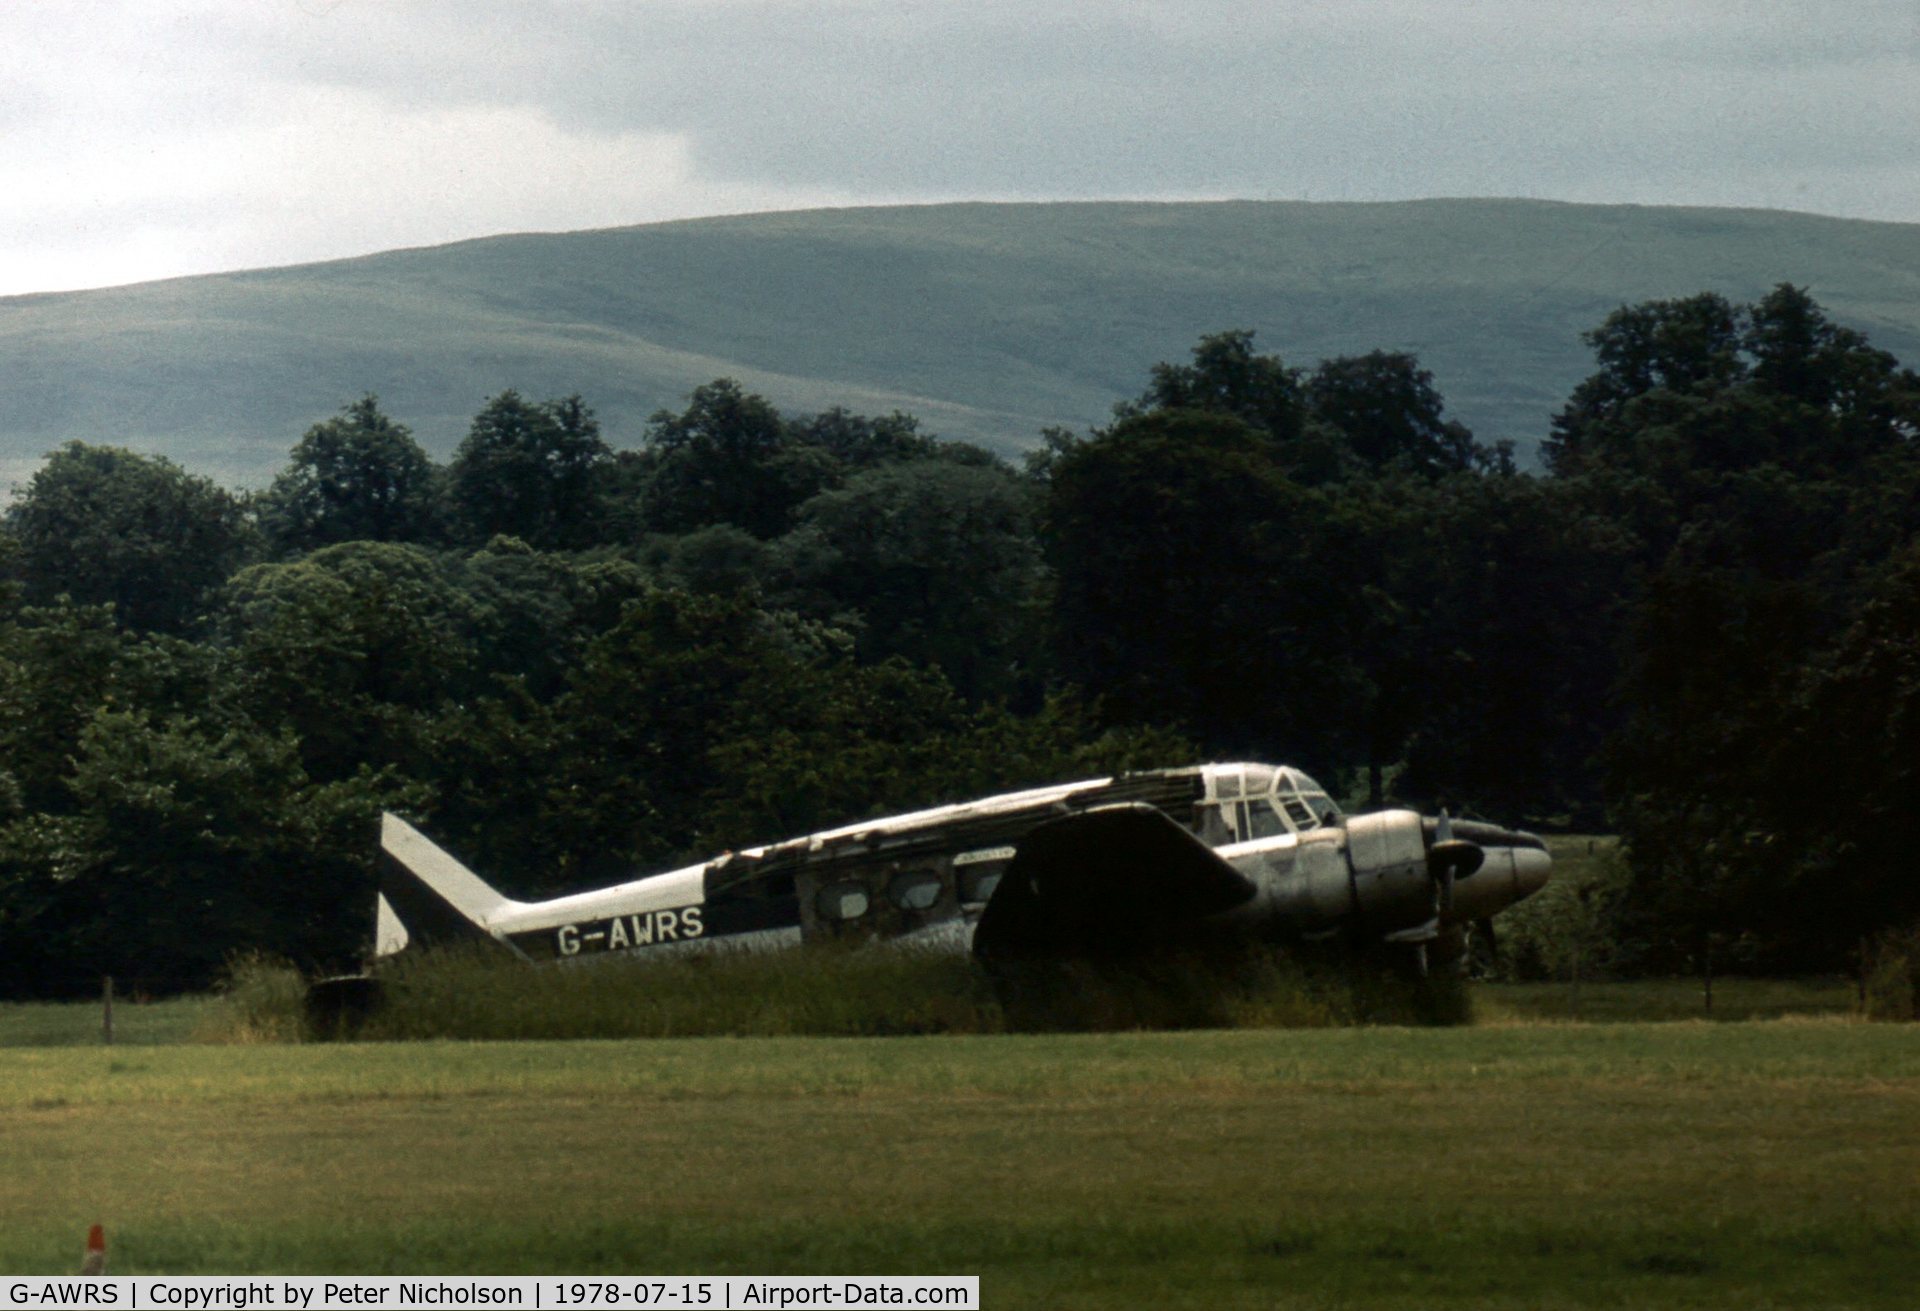 G-AWRS, Avro 652A Anson C.19 Srs 2 C/N 33785, One of the Strathallan stored Ansons as seen at the 1978 Open Day.